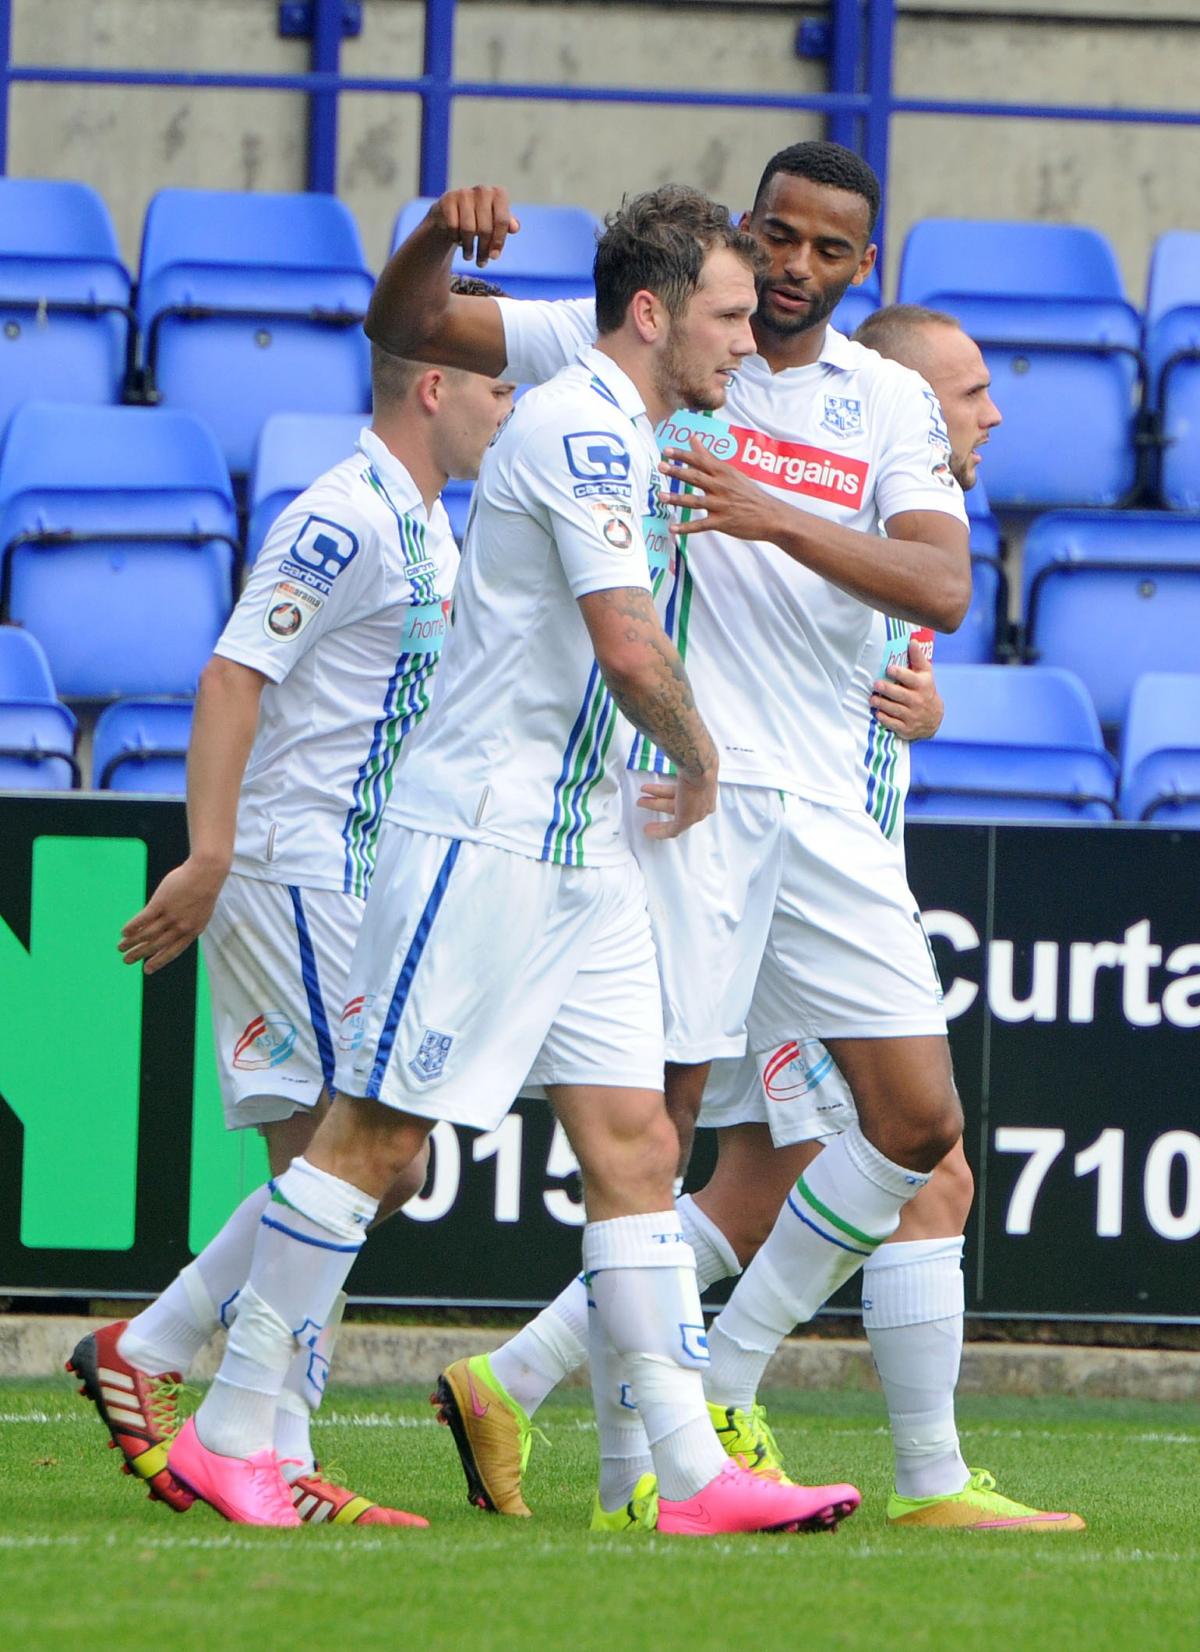 Tranmere Rovers V Chester City 2015. Pictures: Paul heaps